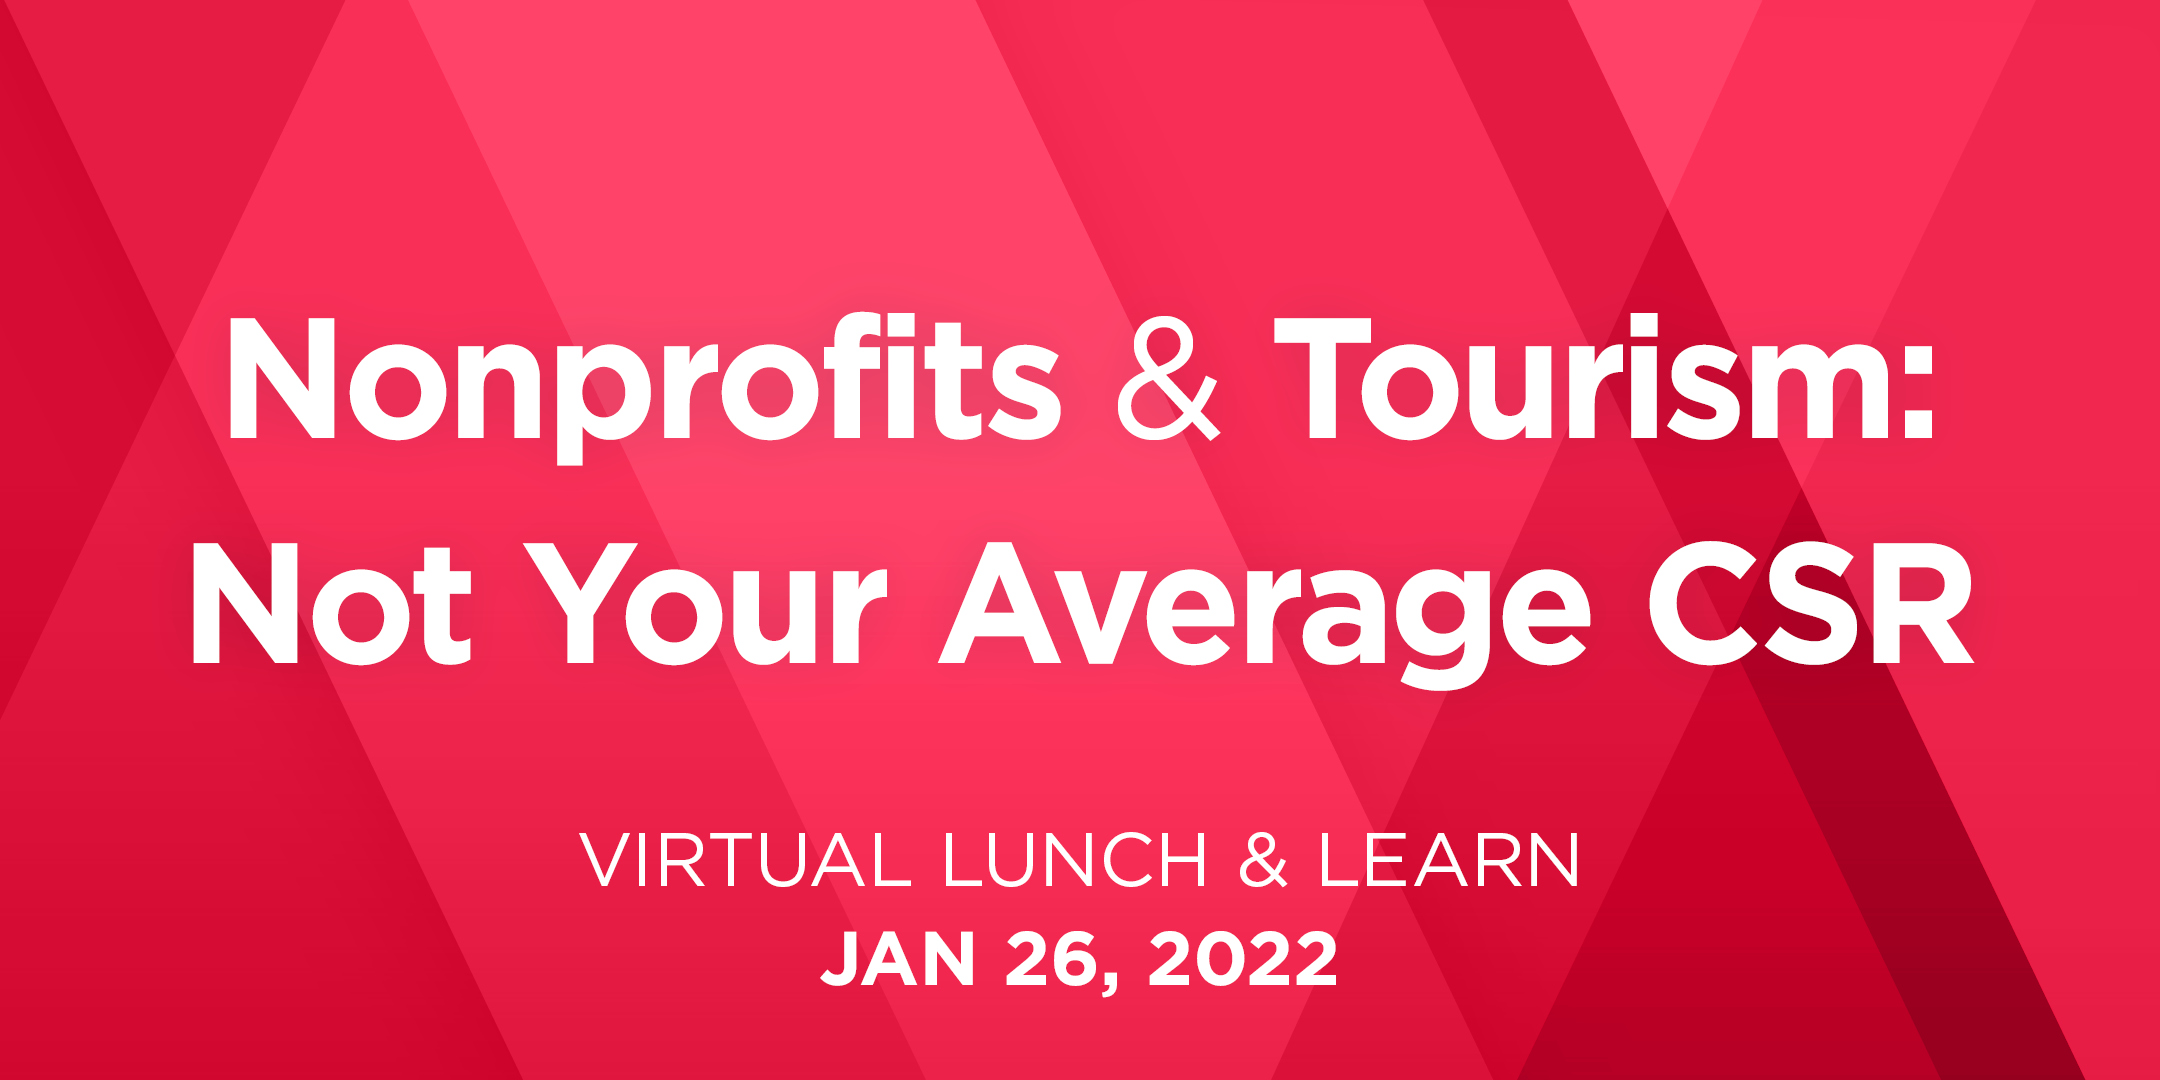 “Nonprofits & Tourism: Not Your Average CSR” – A Virtual Lunch & Learn on January 26, 2022